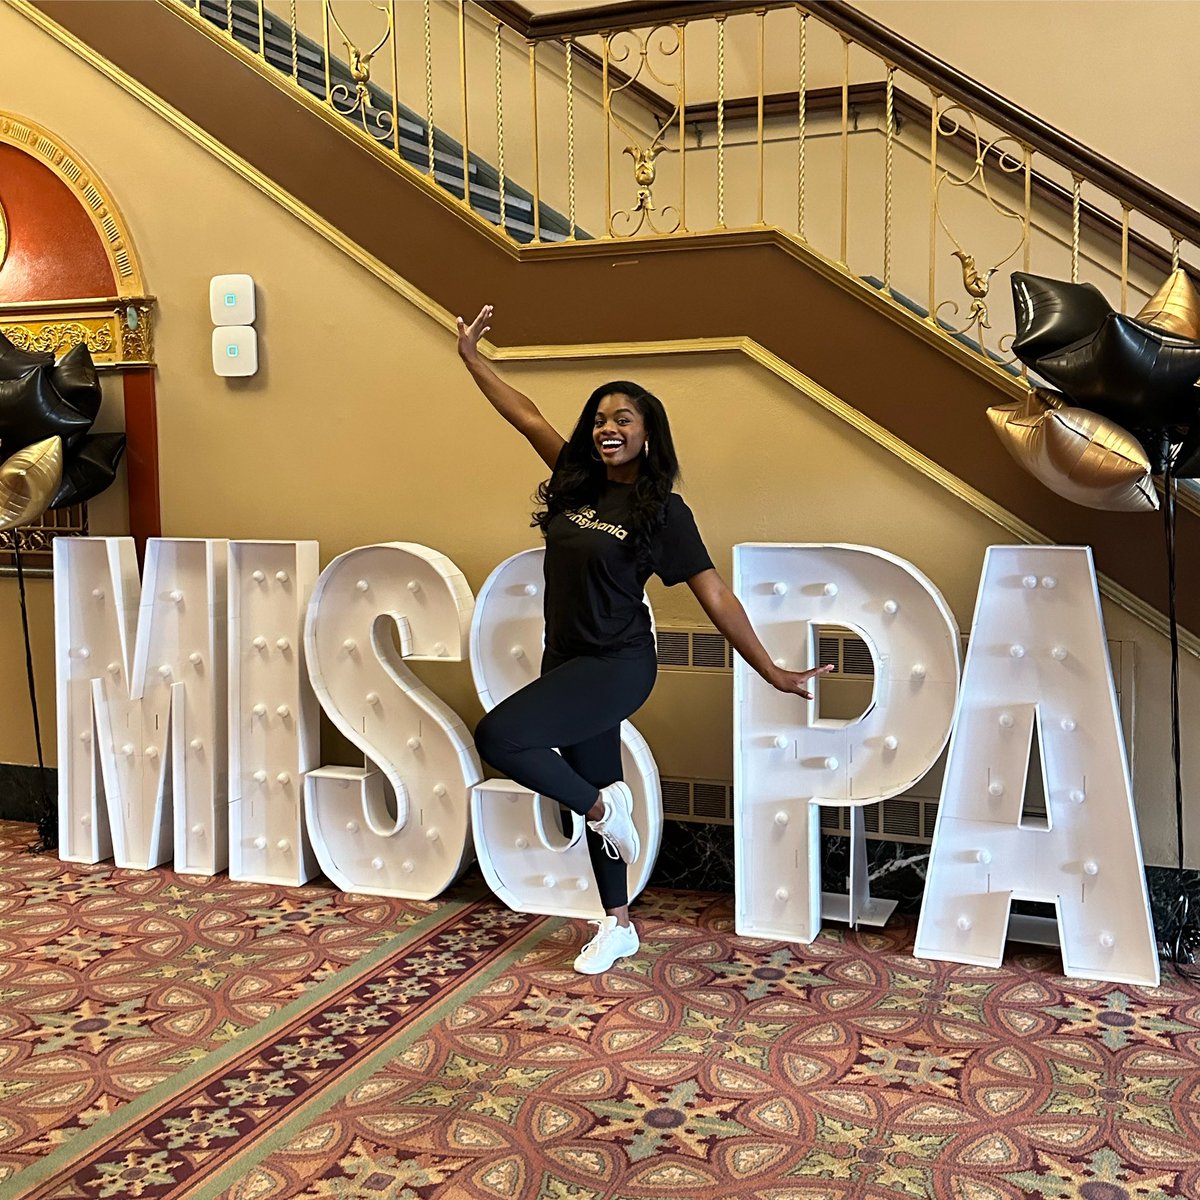 #MissPennslvania has officially begun 🥳 I had my interview earlier today - it went AWESOME!  I am so excited to kick-off night 1 and get started with the on-stage portion of the competition!
•
Thank you Appell Center for hosting us!
•
#ExploreYork #VisitPA #DowntownYork